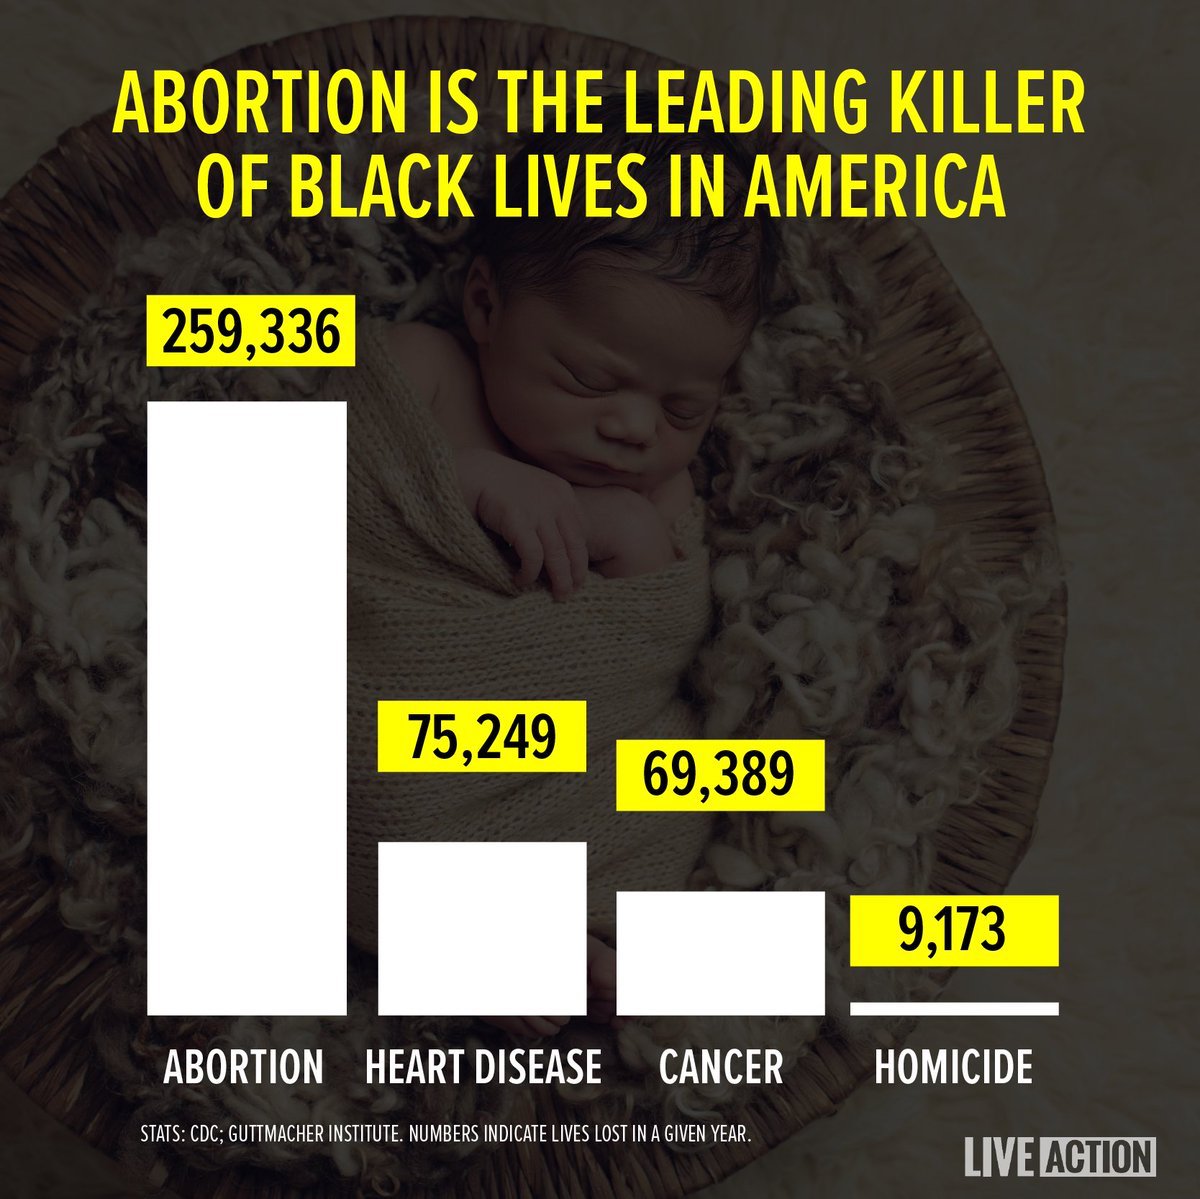 Check out my latest article on Planned Parenthood, a racist organization, which puts 80% of its abortion clinics in black neighborhoods, where 13% of Americans live, while 30% of its abortions are black babies. https://fightingmonarch.com/2020/07/21/planned-parenthood-supports-genocide/